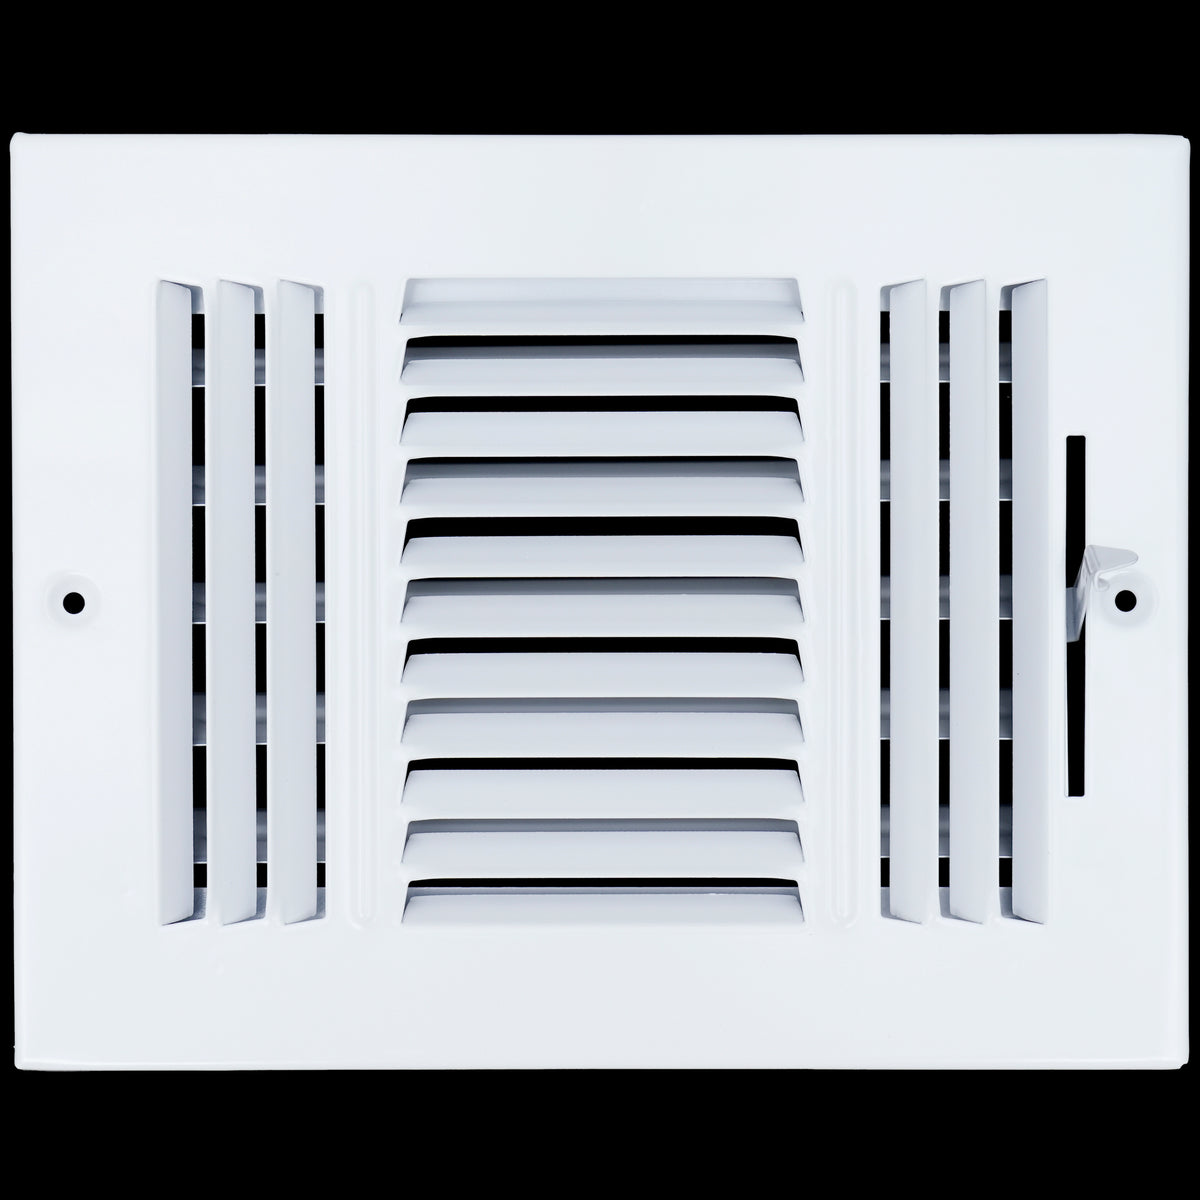 airgrilles 8 x 6 duct opening 3 way steel air supply diffuser for sidewall and ceiling hnd-asg-wh-3way-8x6 764613097597 1